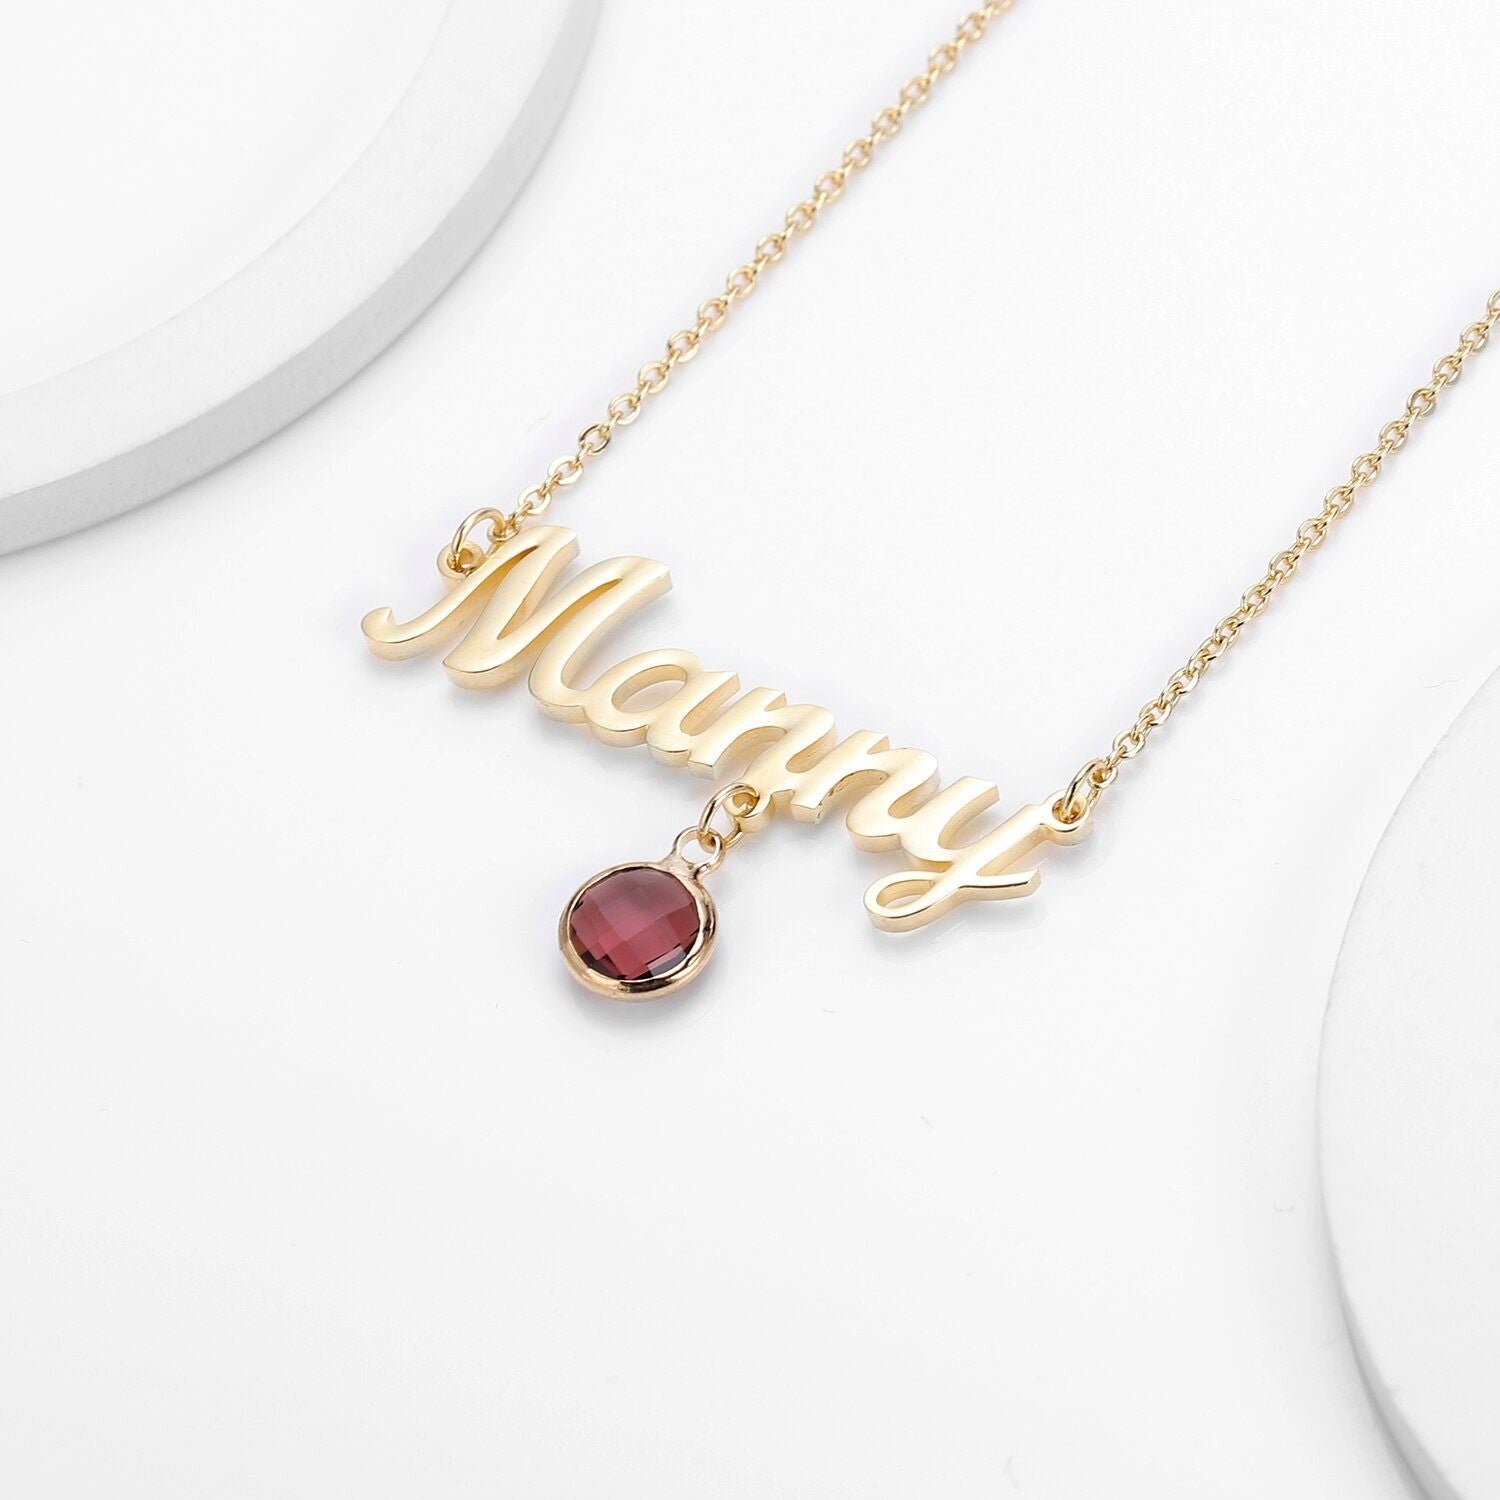 Personalised Name Necklace with Hanging Birthstone